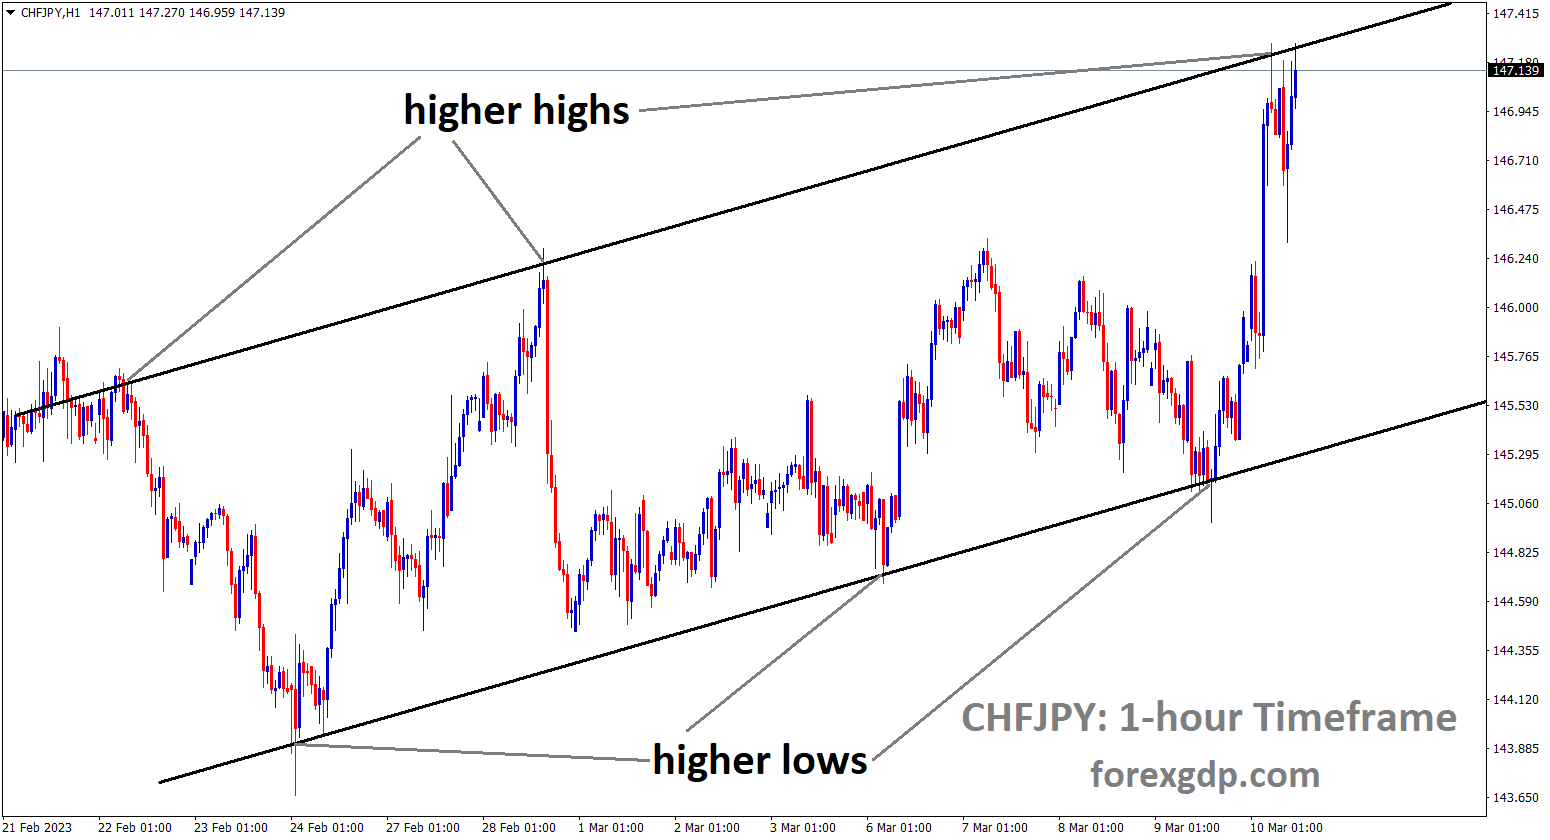 CHFJPY is moving an Ascending channel and the market has reached the higher high area of the channel.